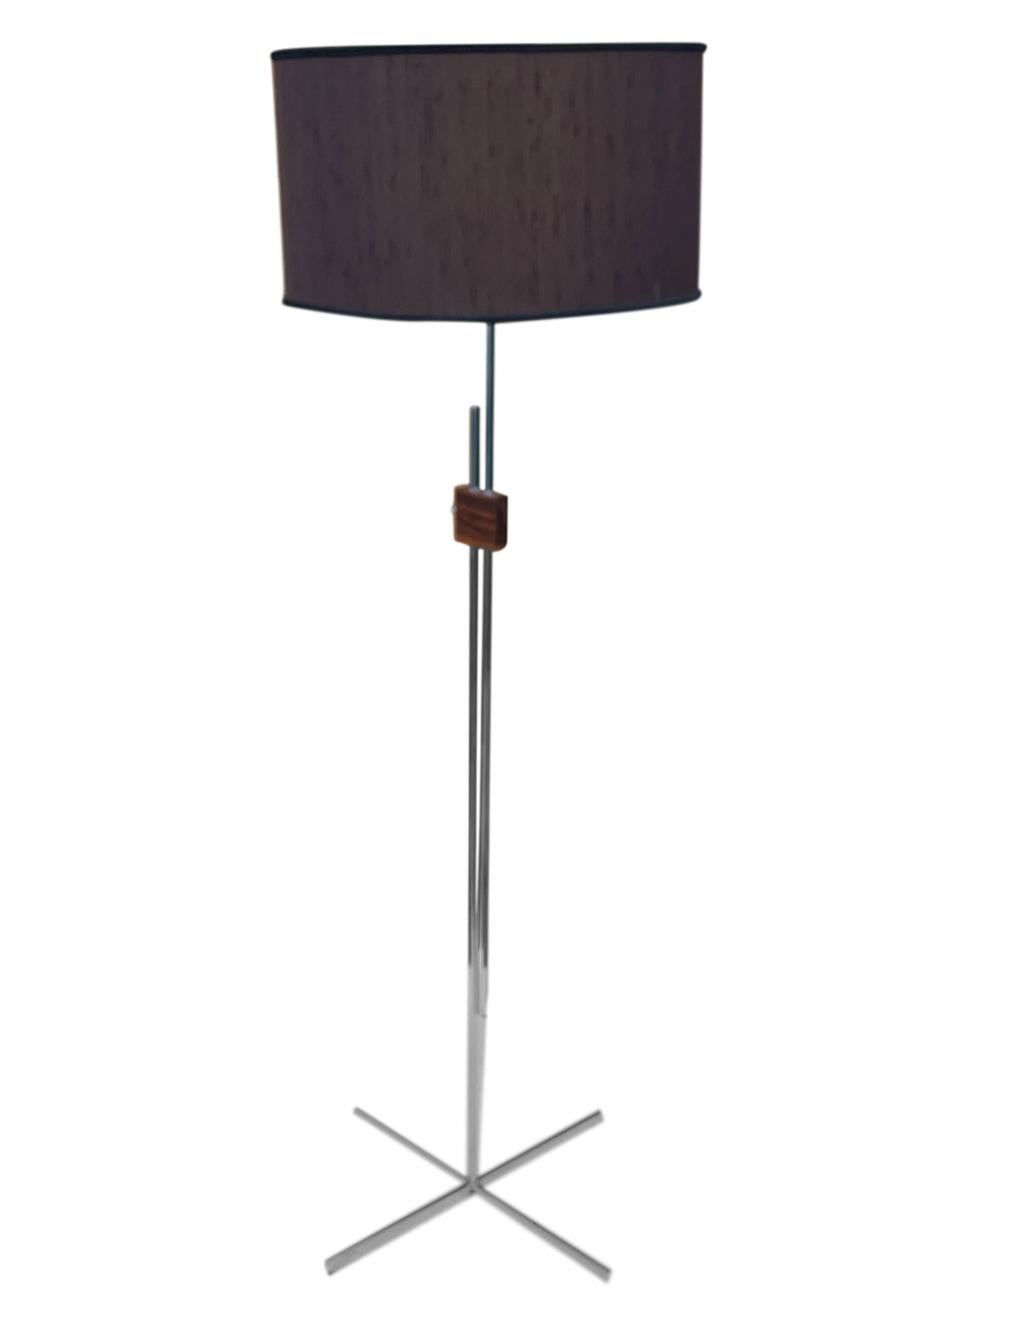 Late 20th Century Mid Century Danish Modern Adjustable Height Floor Lamp in Rosewood & Chrome For Sale